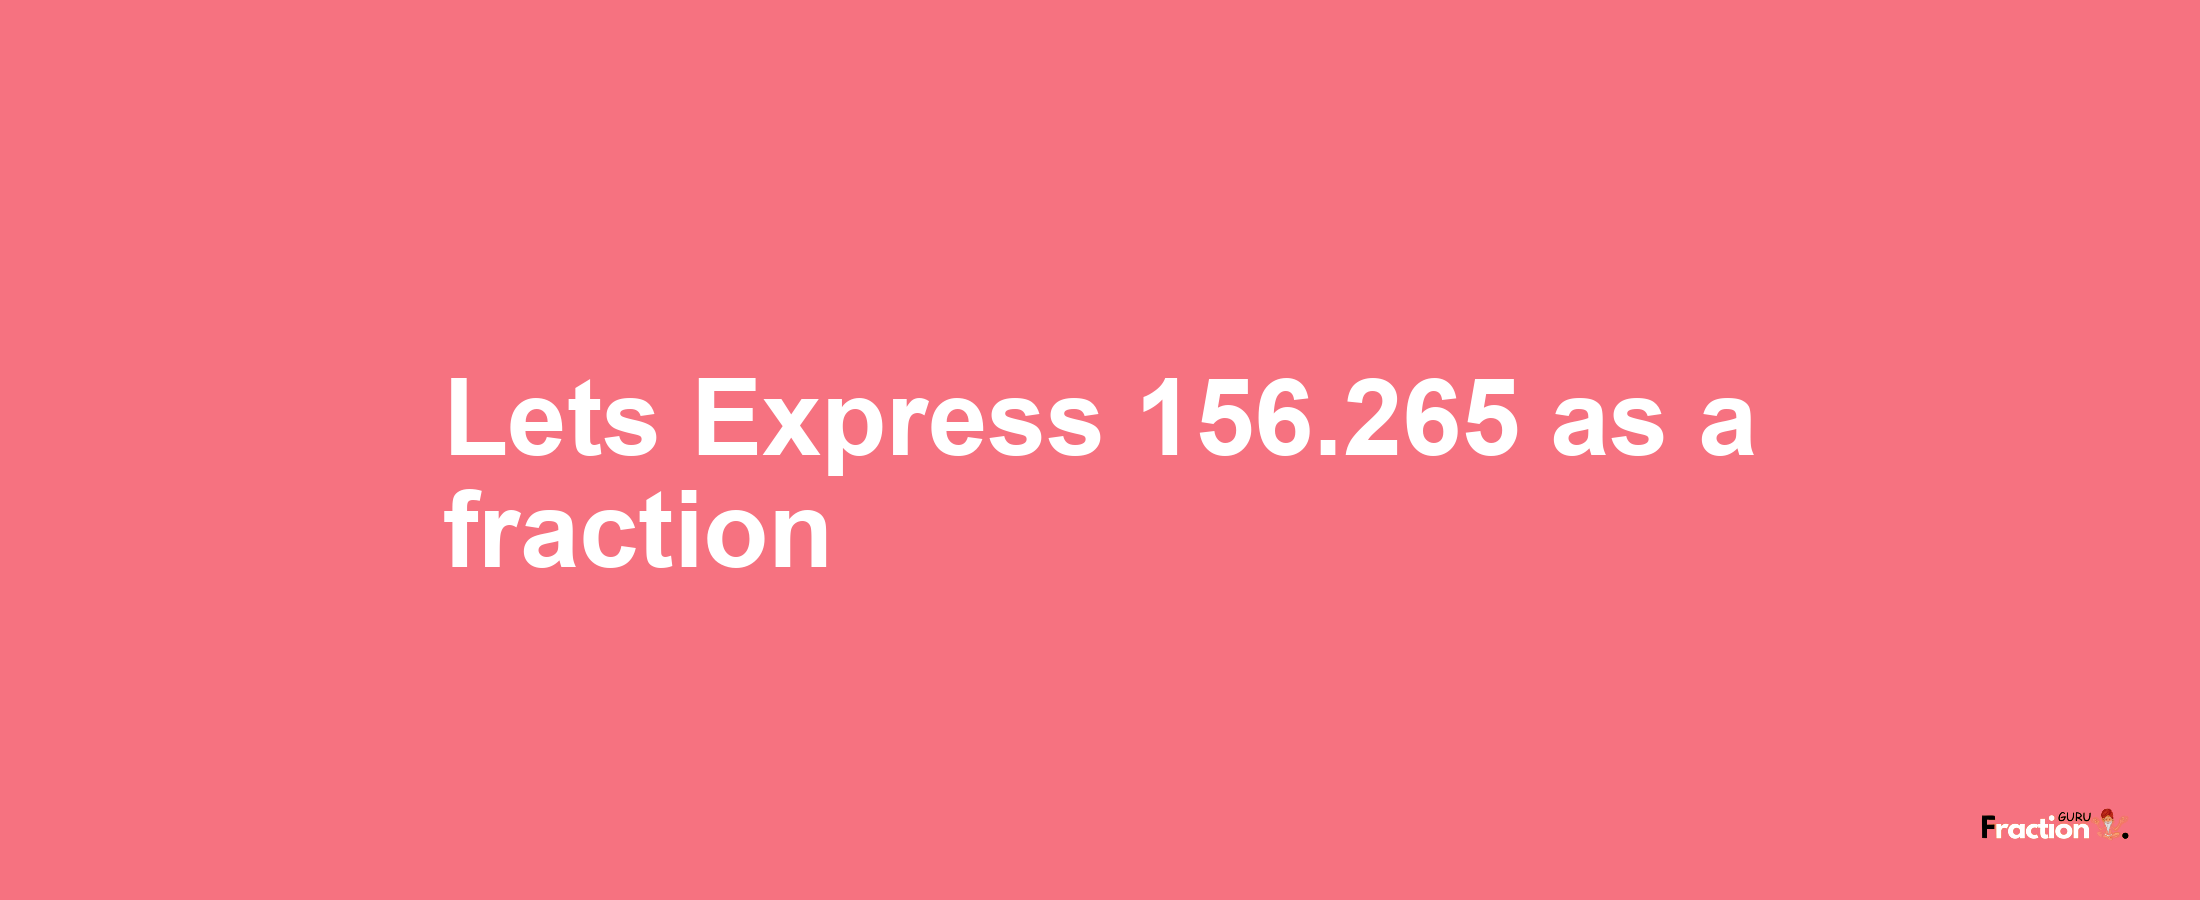 Lets Express 156.265 as afraction